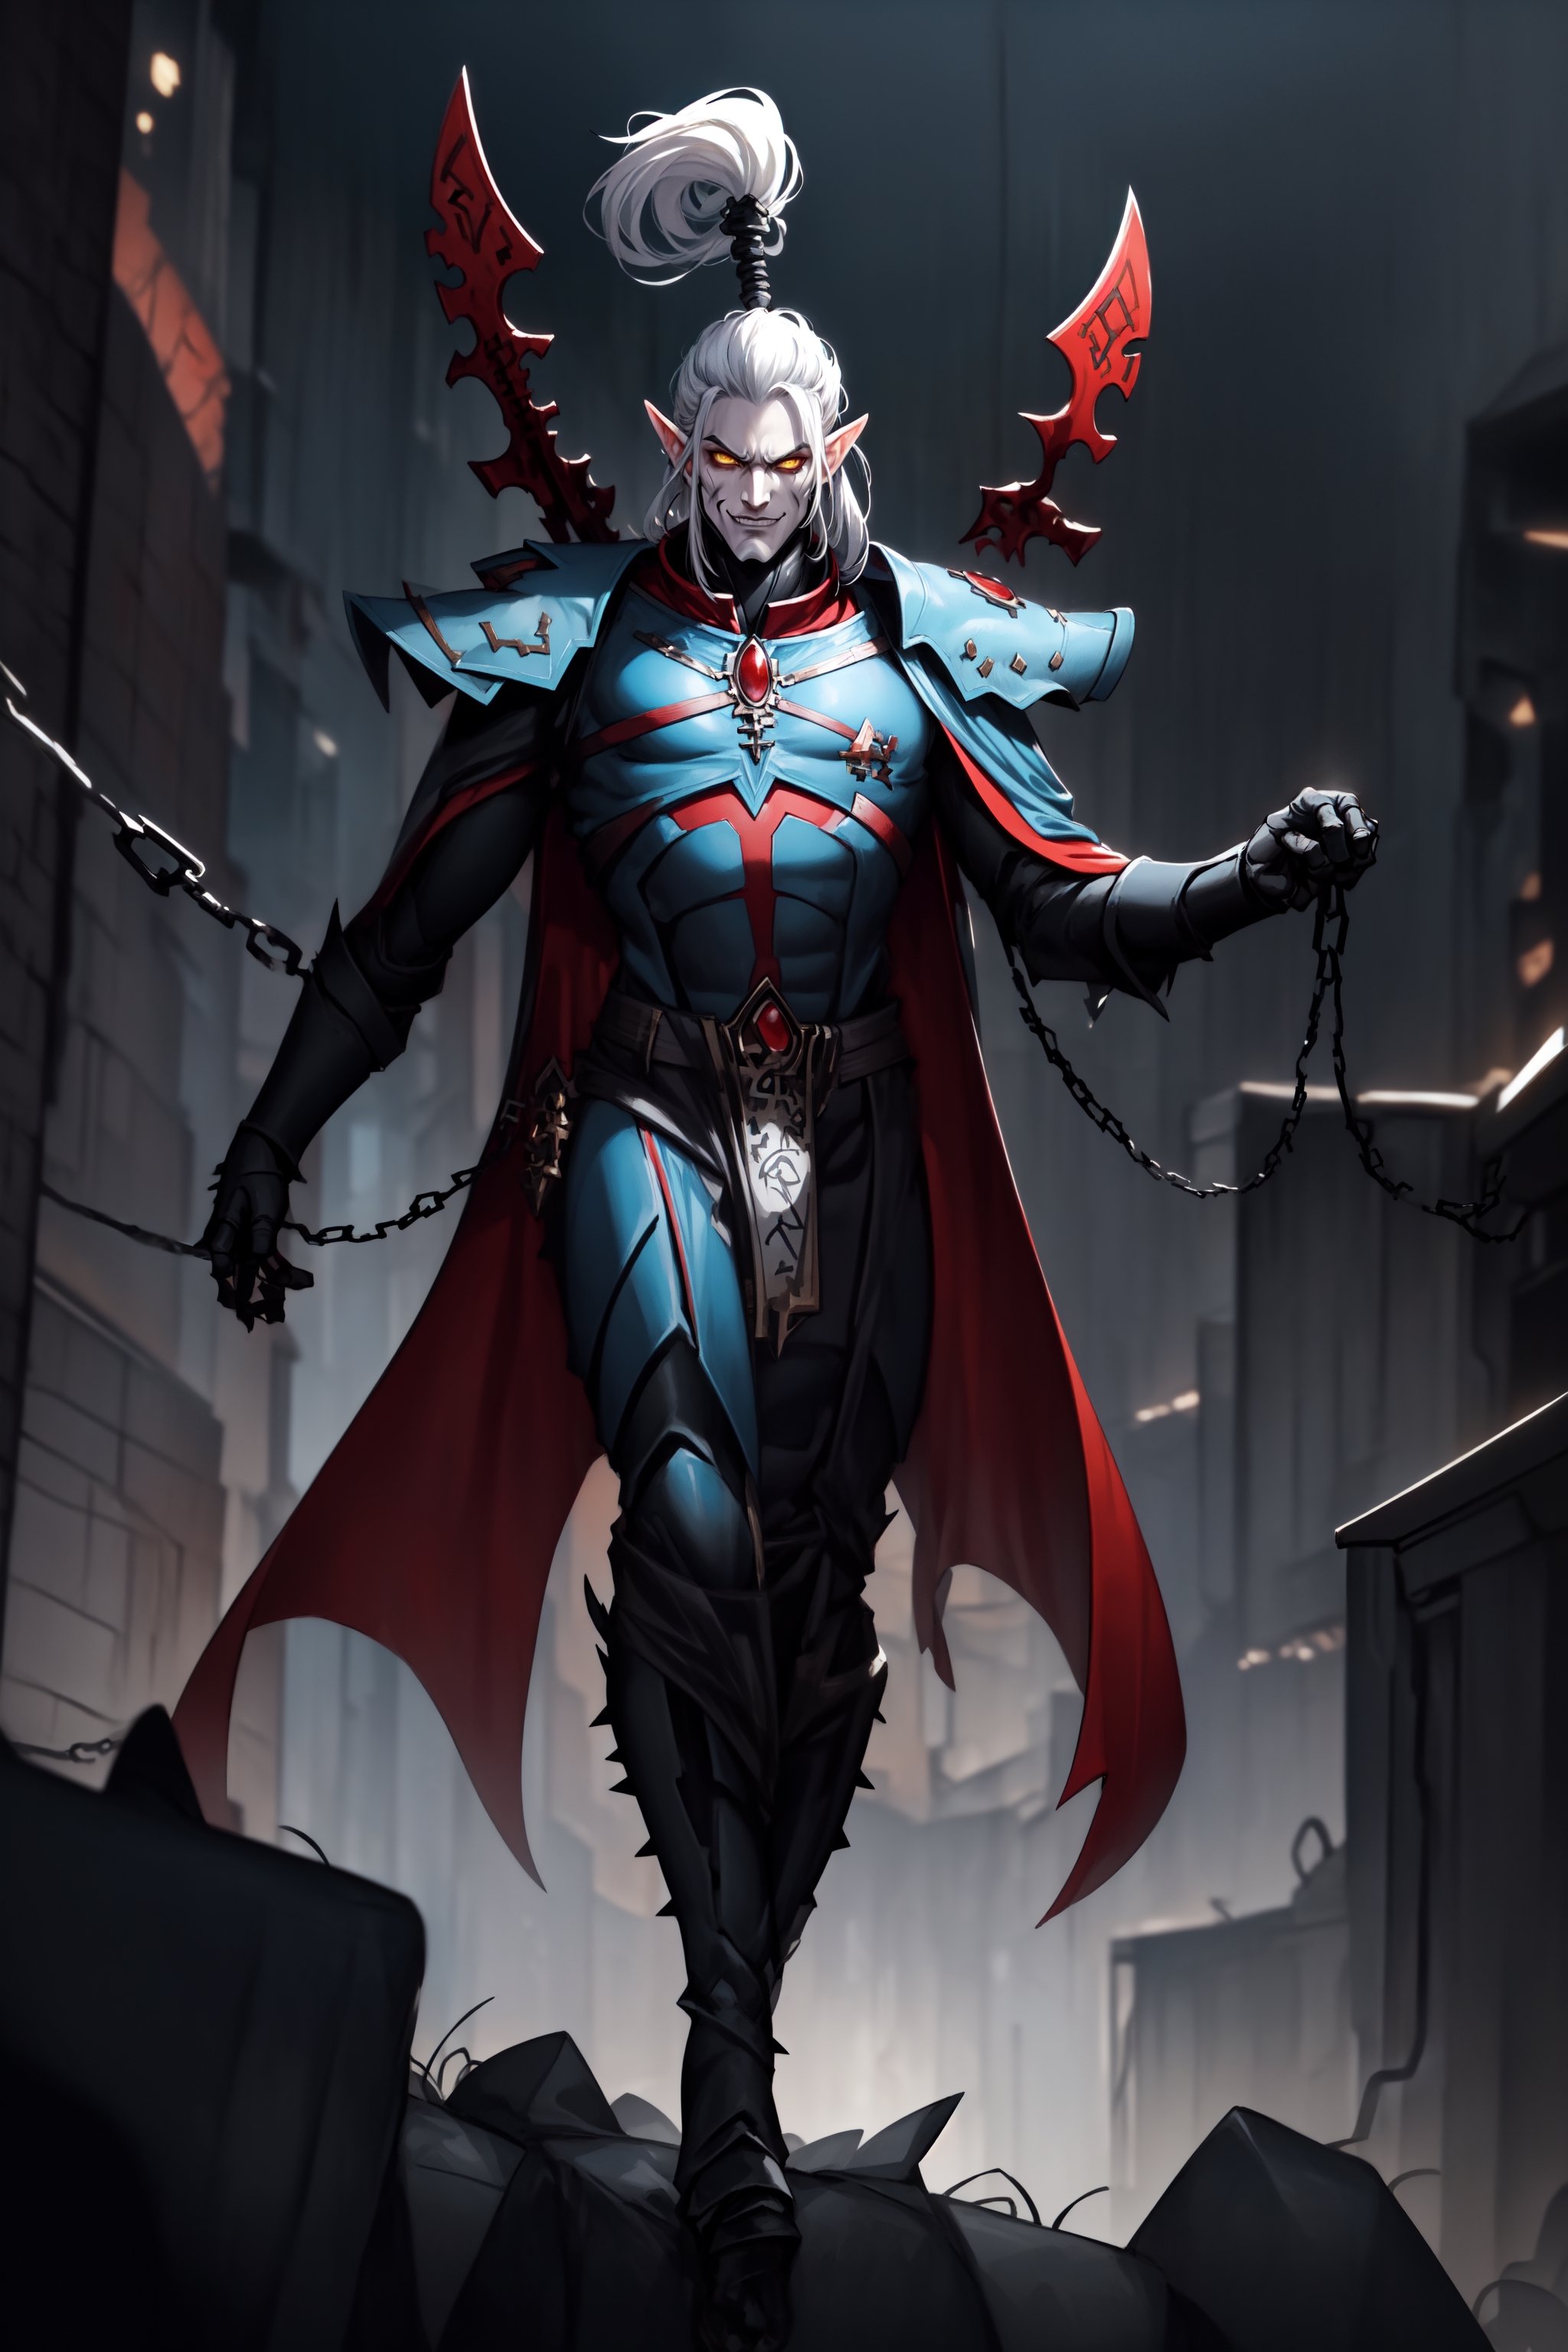 A full-body concept illustration of a single athletic male individual in the style of Warhammer 40k Drukhari Archon. He is a tall and darkly dashing Dark Eldar male from the Warhammer 40000 franchise. This Male Drukhari has deathly pale white skin from which his veins are barely visible. This male Drukhari has night black raven hair that is kept in a tall topknot ponytail. This Drukhari male has devilish yellow eyes that speak of maliciousness. This male Drukhari has a strikingly handsome elf like face. This male Drukhari has an athletic and muscular body. He is wearing the bluish-black segmented spiked armor of a Drukhari Archon with a red-orange gem in the center of his chest. He has several skulls dangling from chains around his waist. He is not wearing a helmet. The dark city of his people is visible in the brightly lit and detailed background. He is facing the camera with a devilish grin, complex_background, detailed_background, background, 